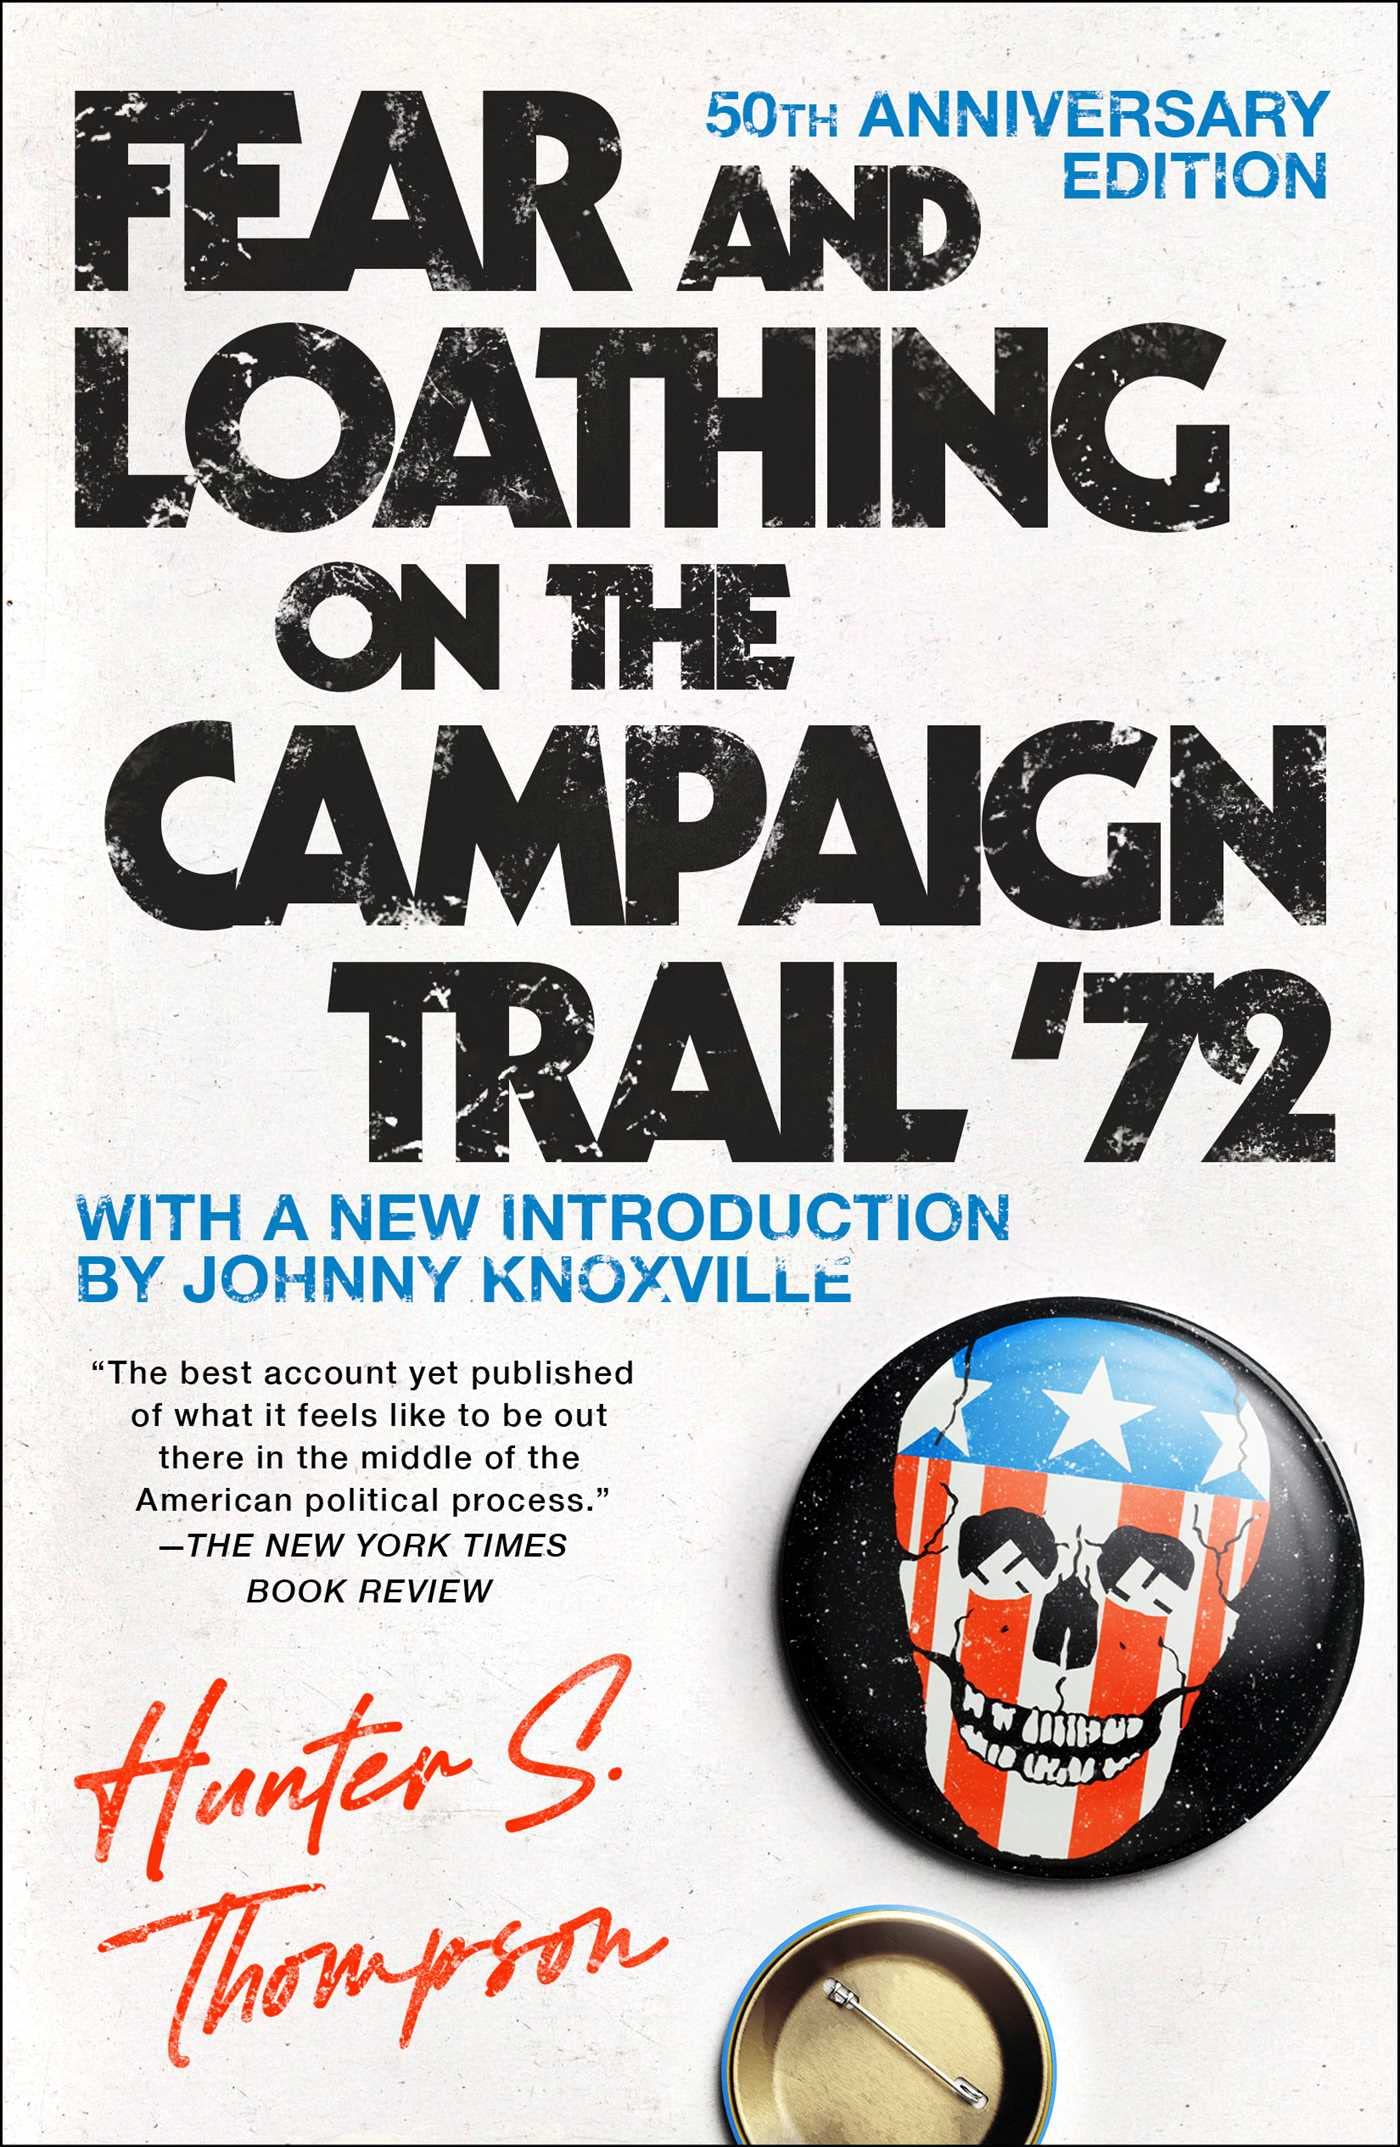 Fear and Loathing on the Campaign Trail '72: 40th Anniversary Edition